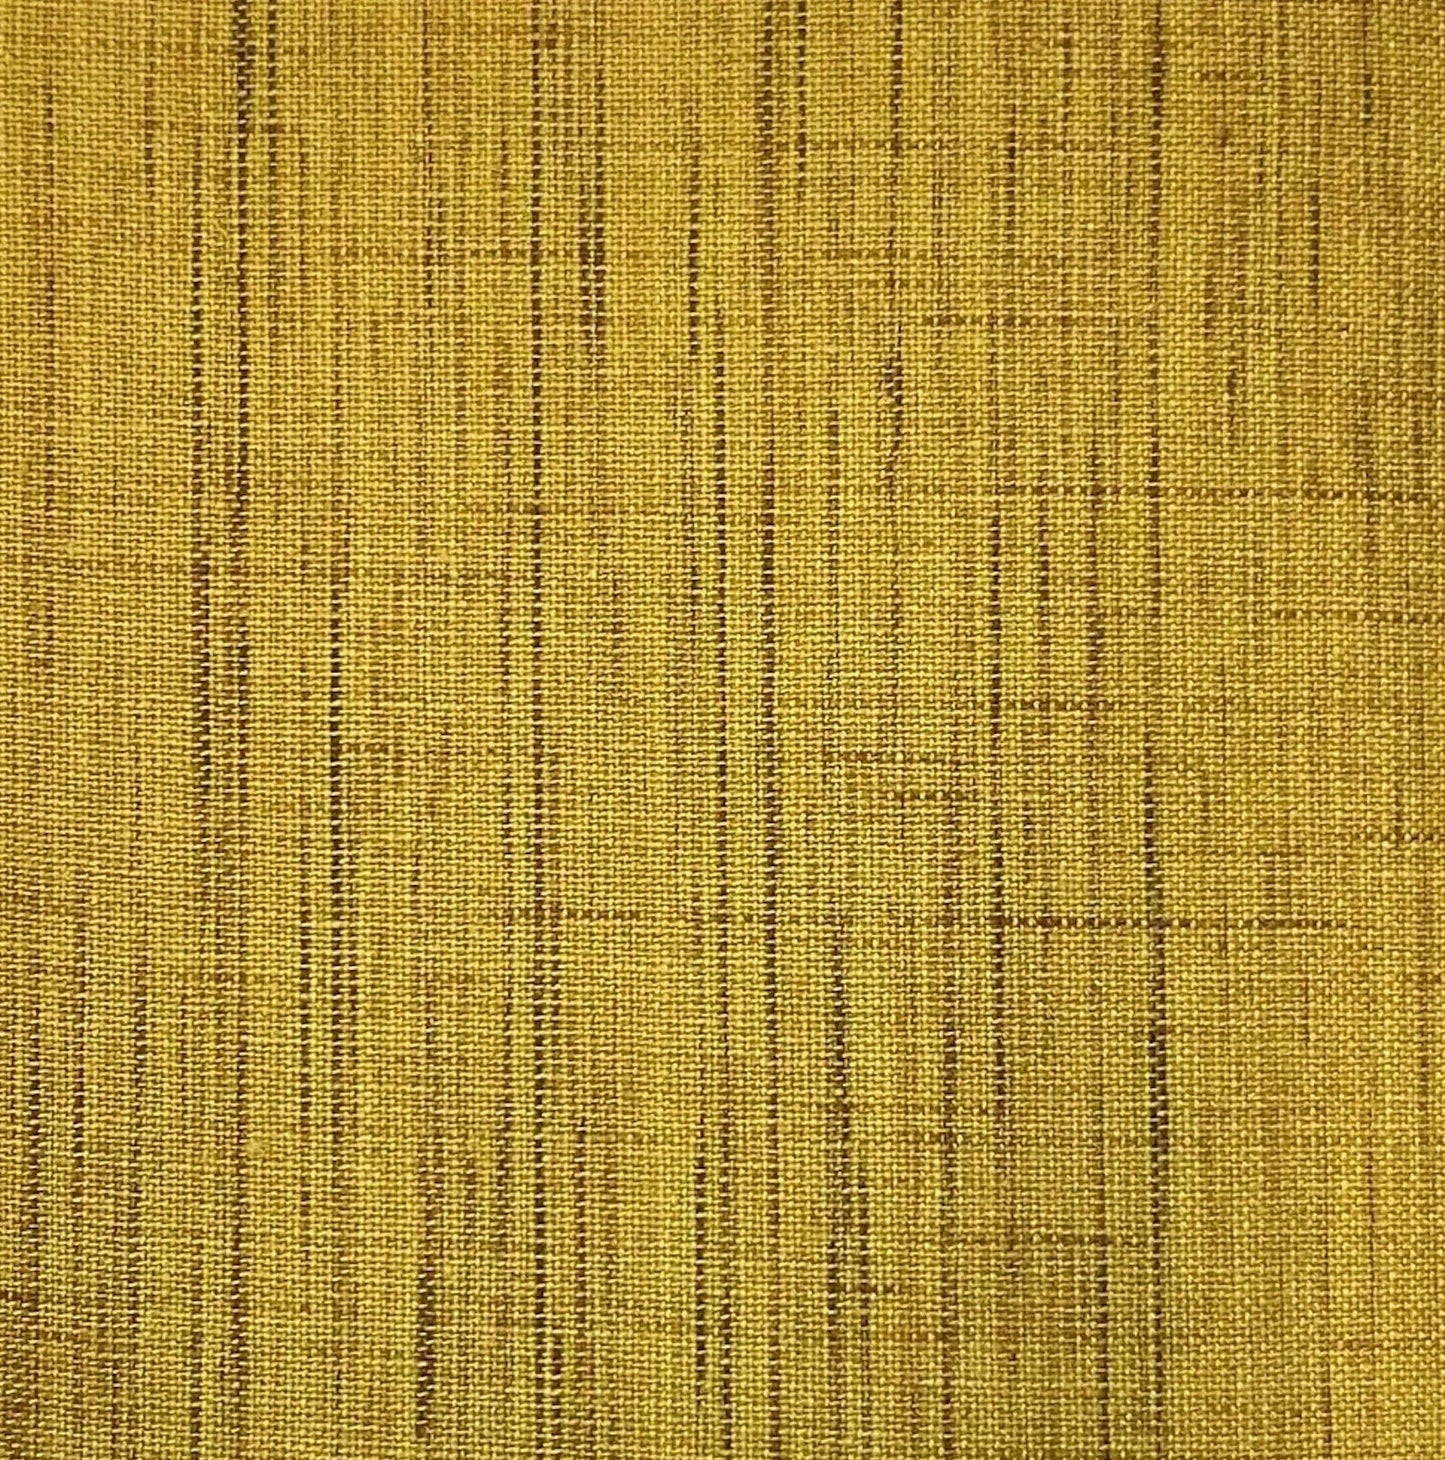 Tweed Thicket - Gold - 4105 - homesewn